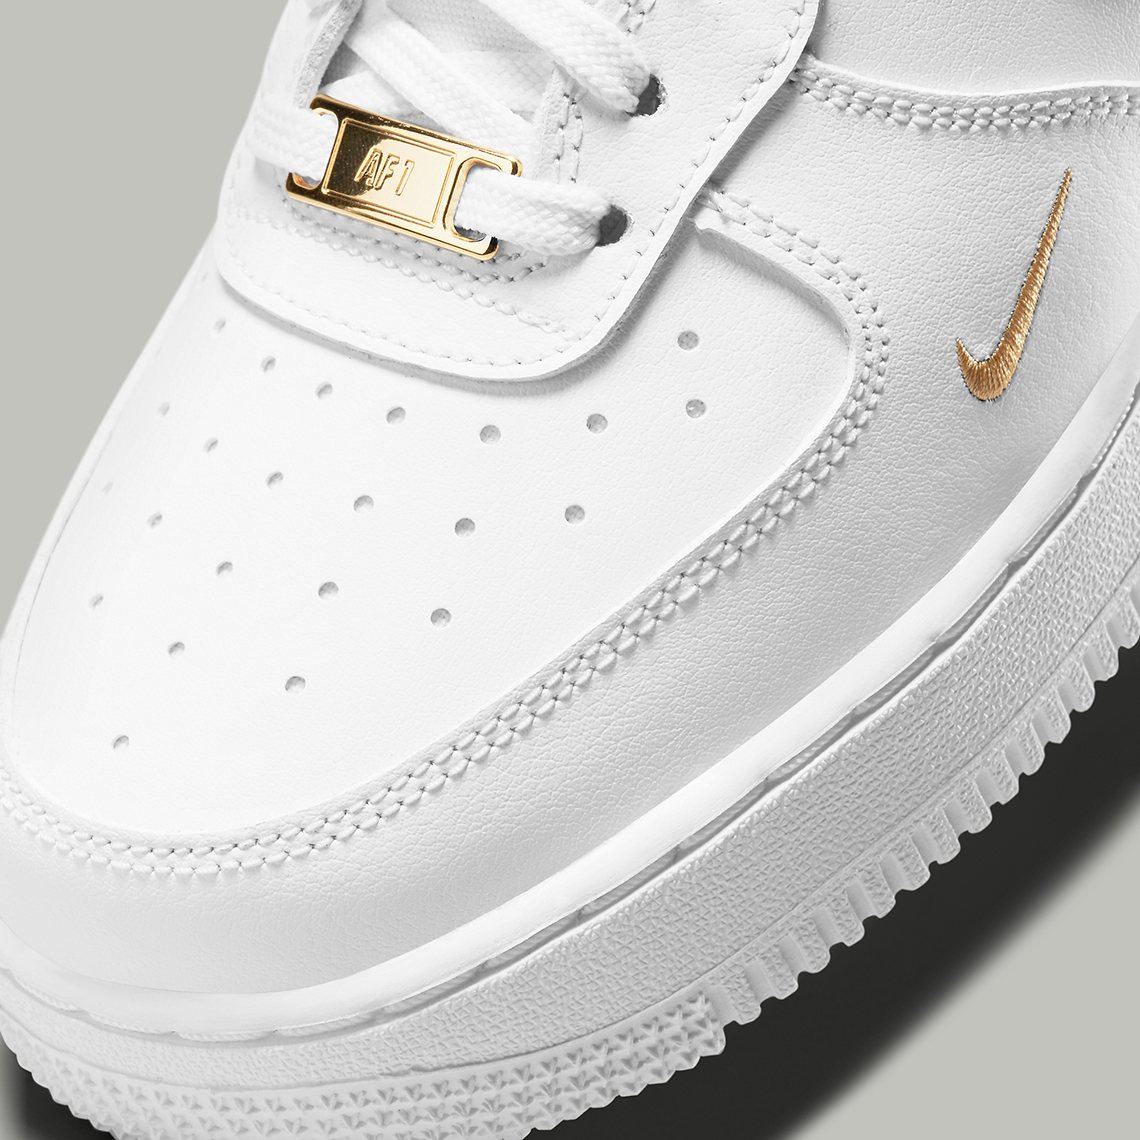 Nike Air Force 1 Cz0270 106 Release Info 7